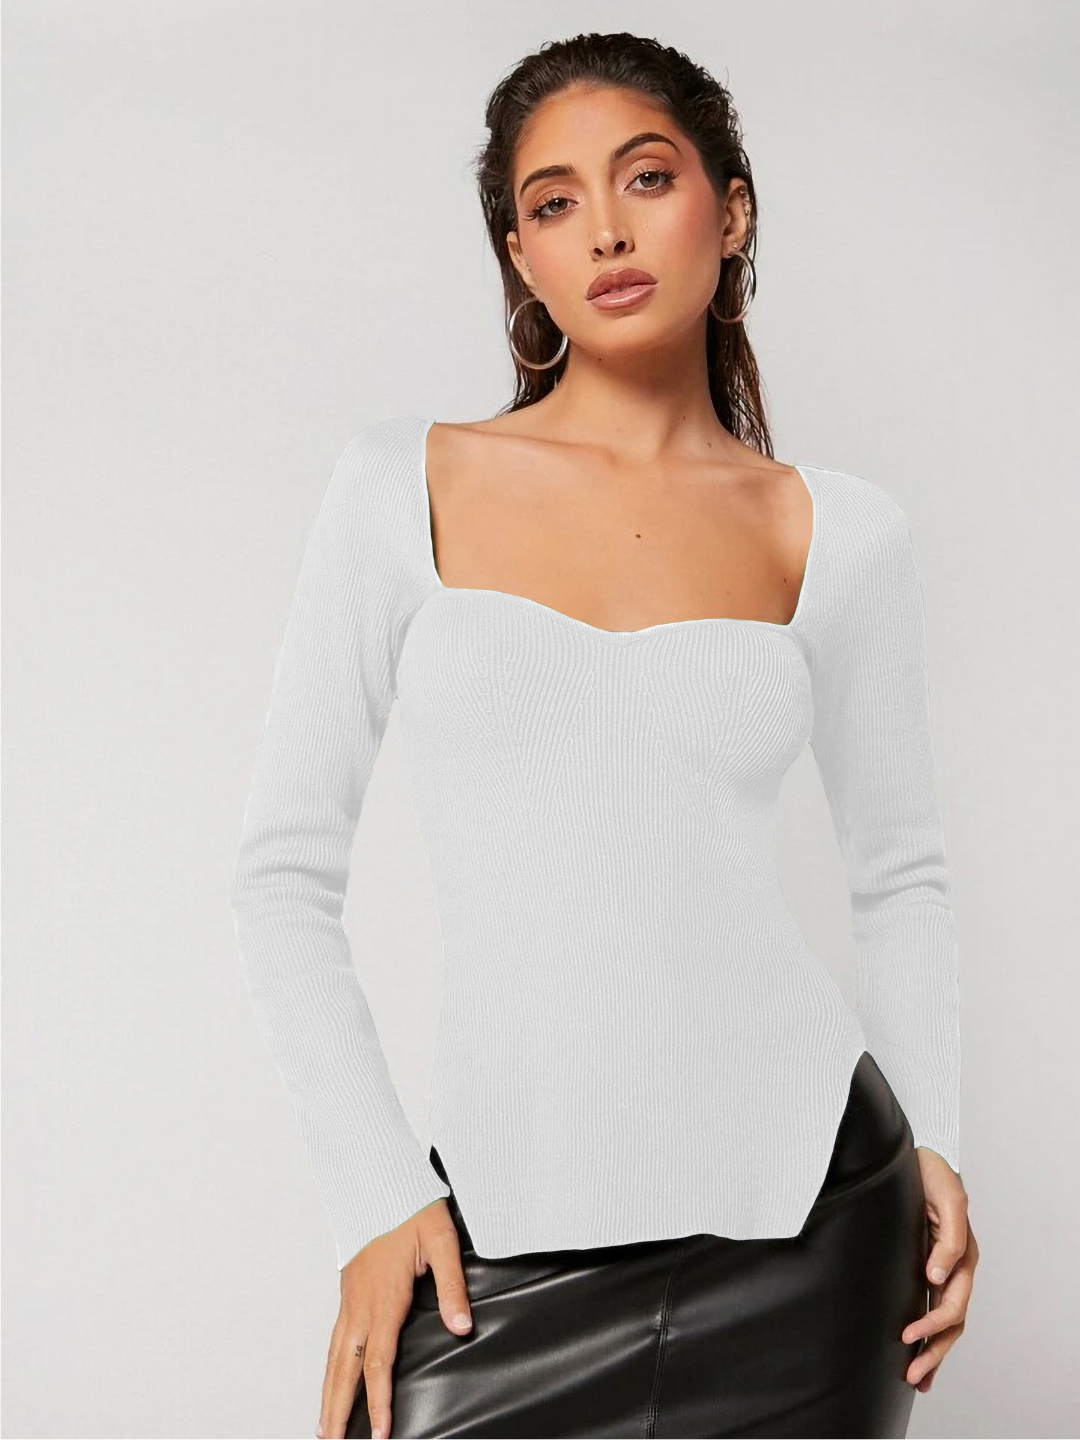 PUMIEY Long Sleeve Shirts for Women Sweetheart Neck, Going Out Tops Sexy  Basic Tee, Splashed White X-Small at  Women's Clothing store